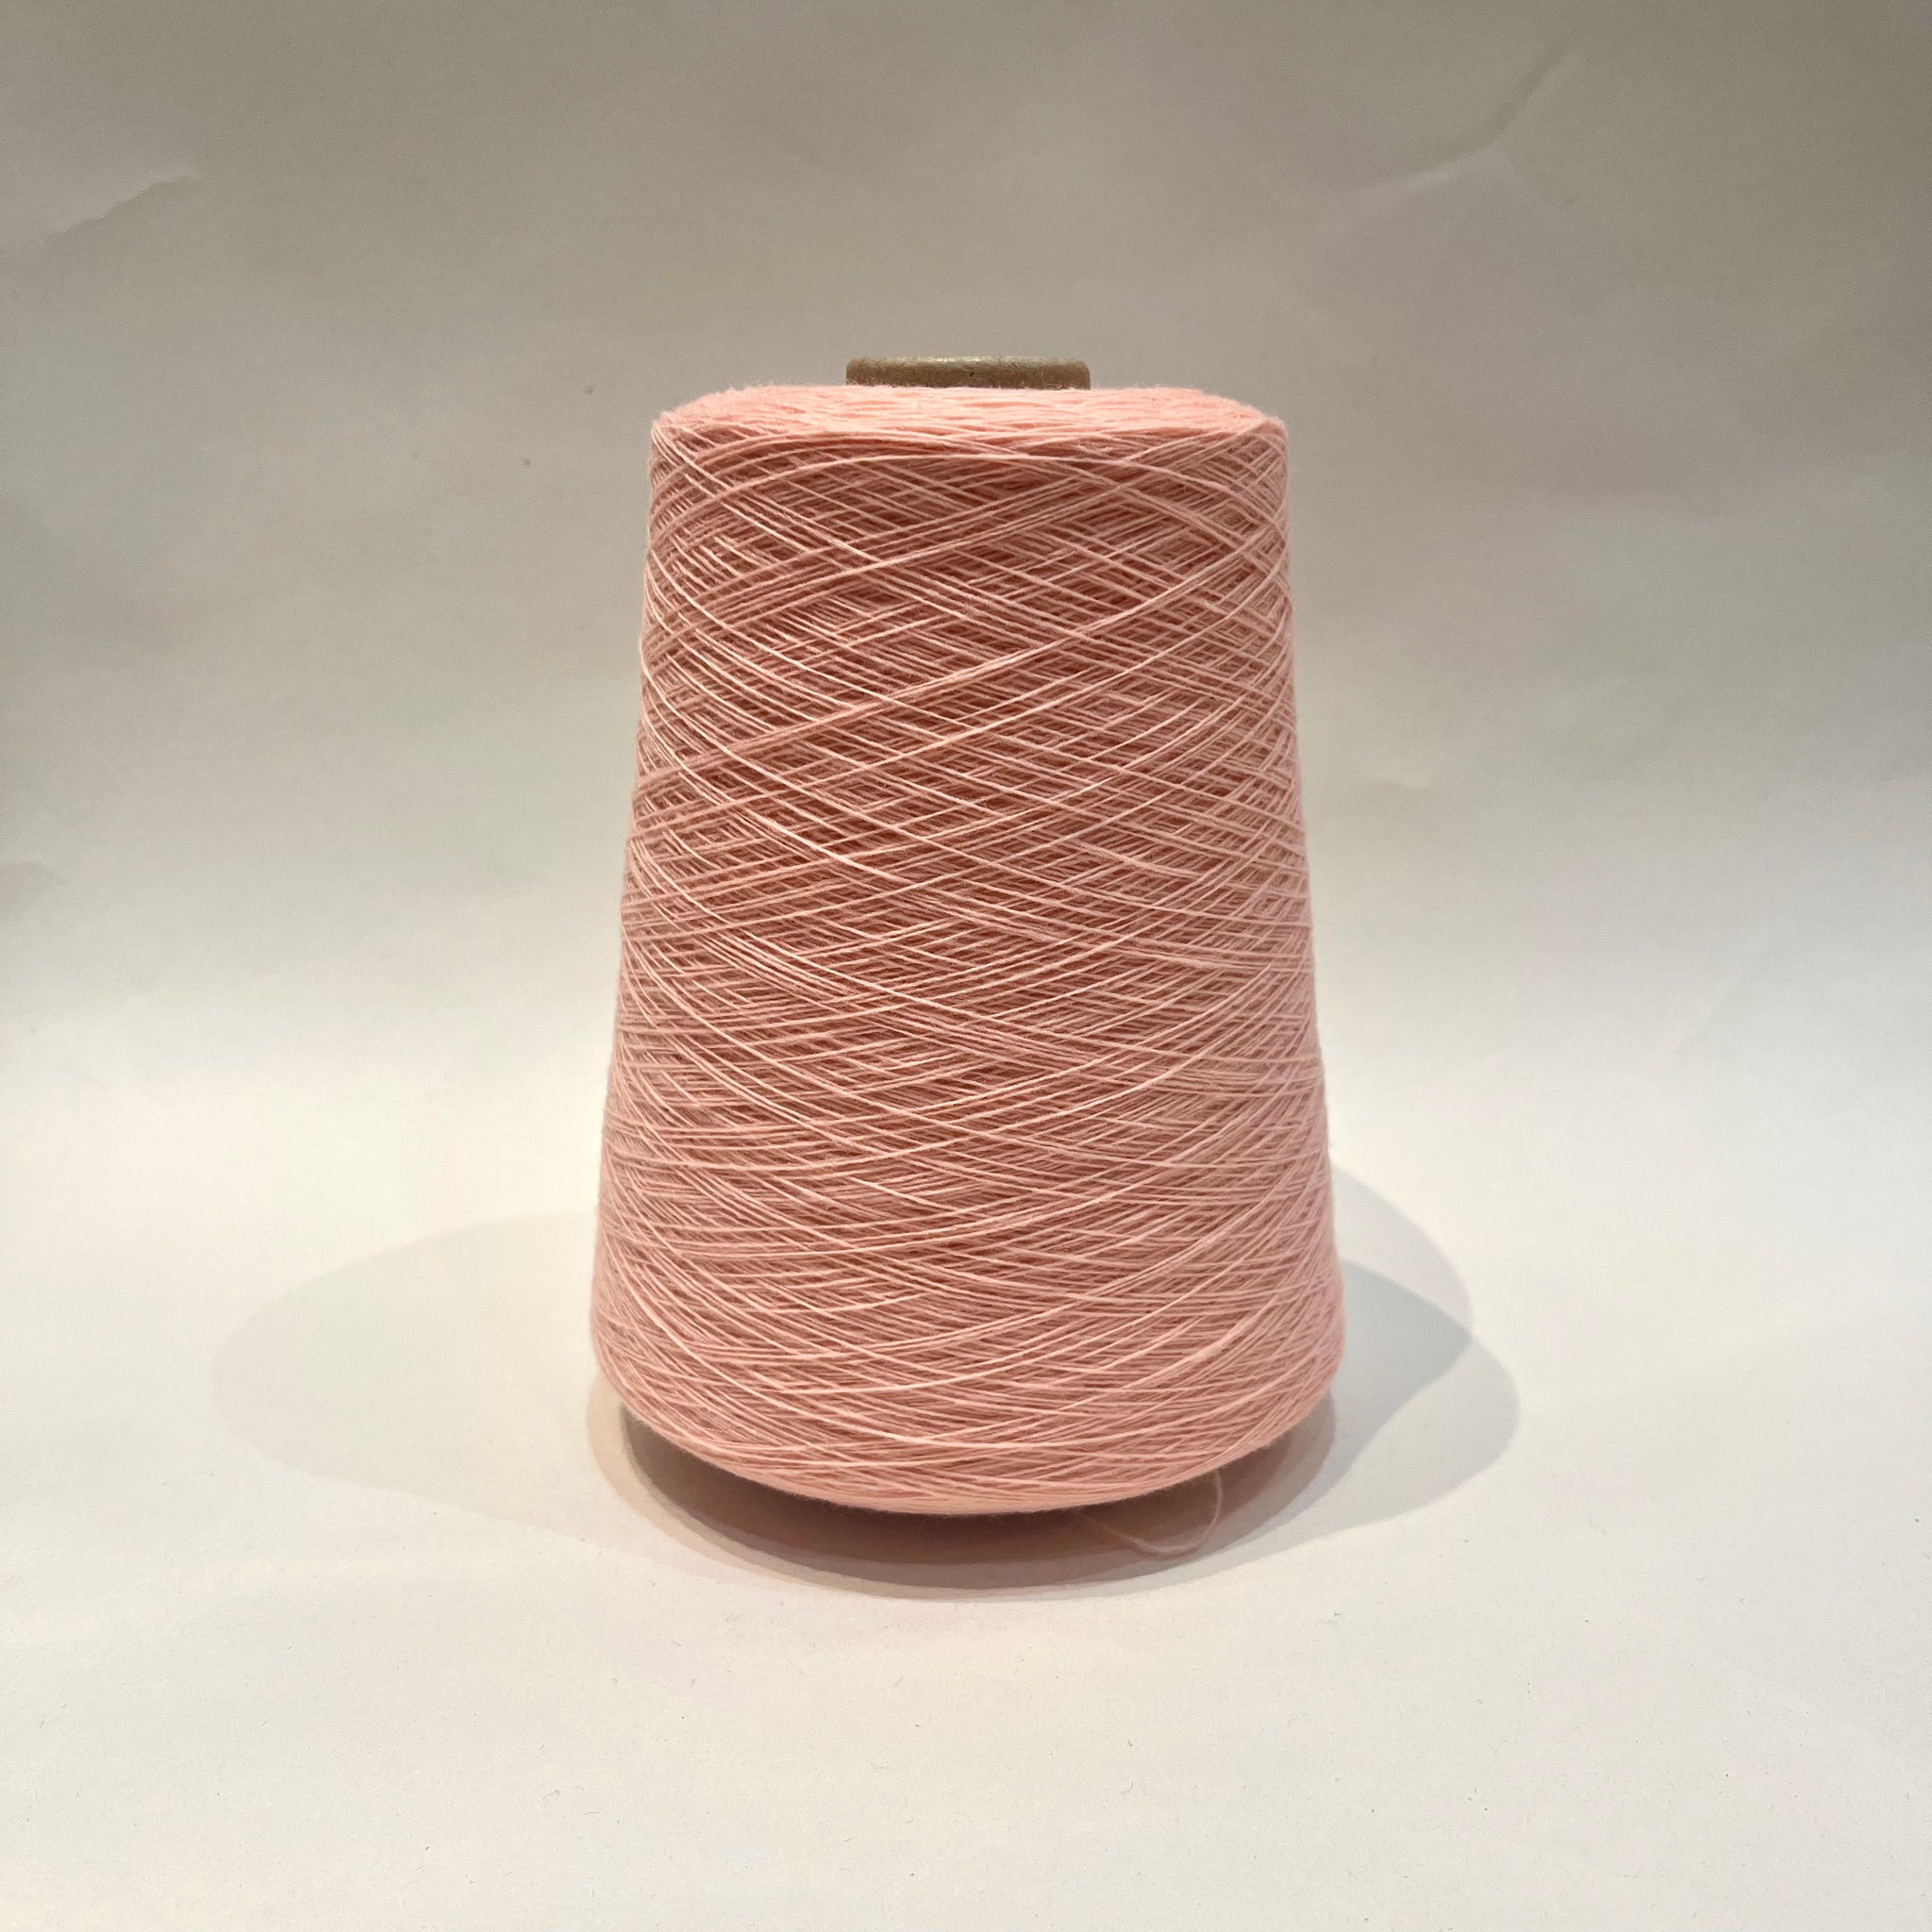 Single Ply Supergeelong Wool - Pink Pony